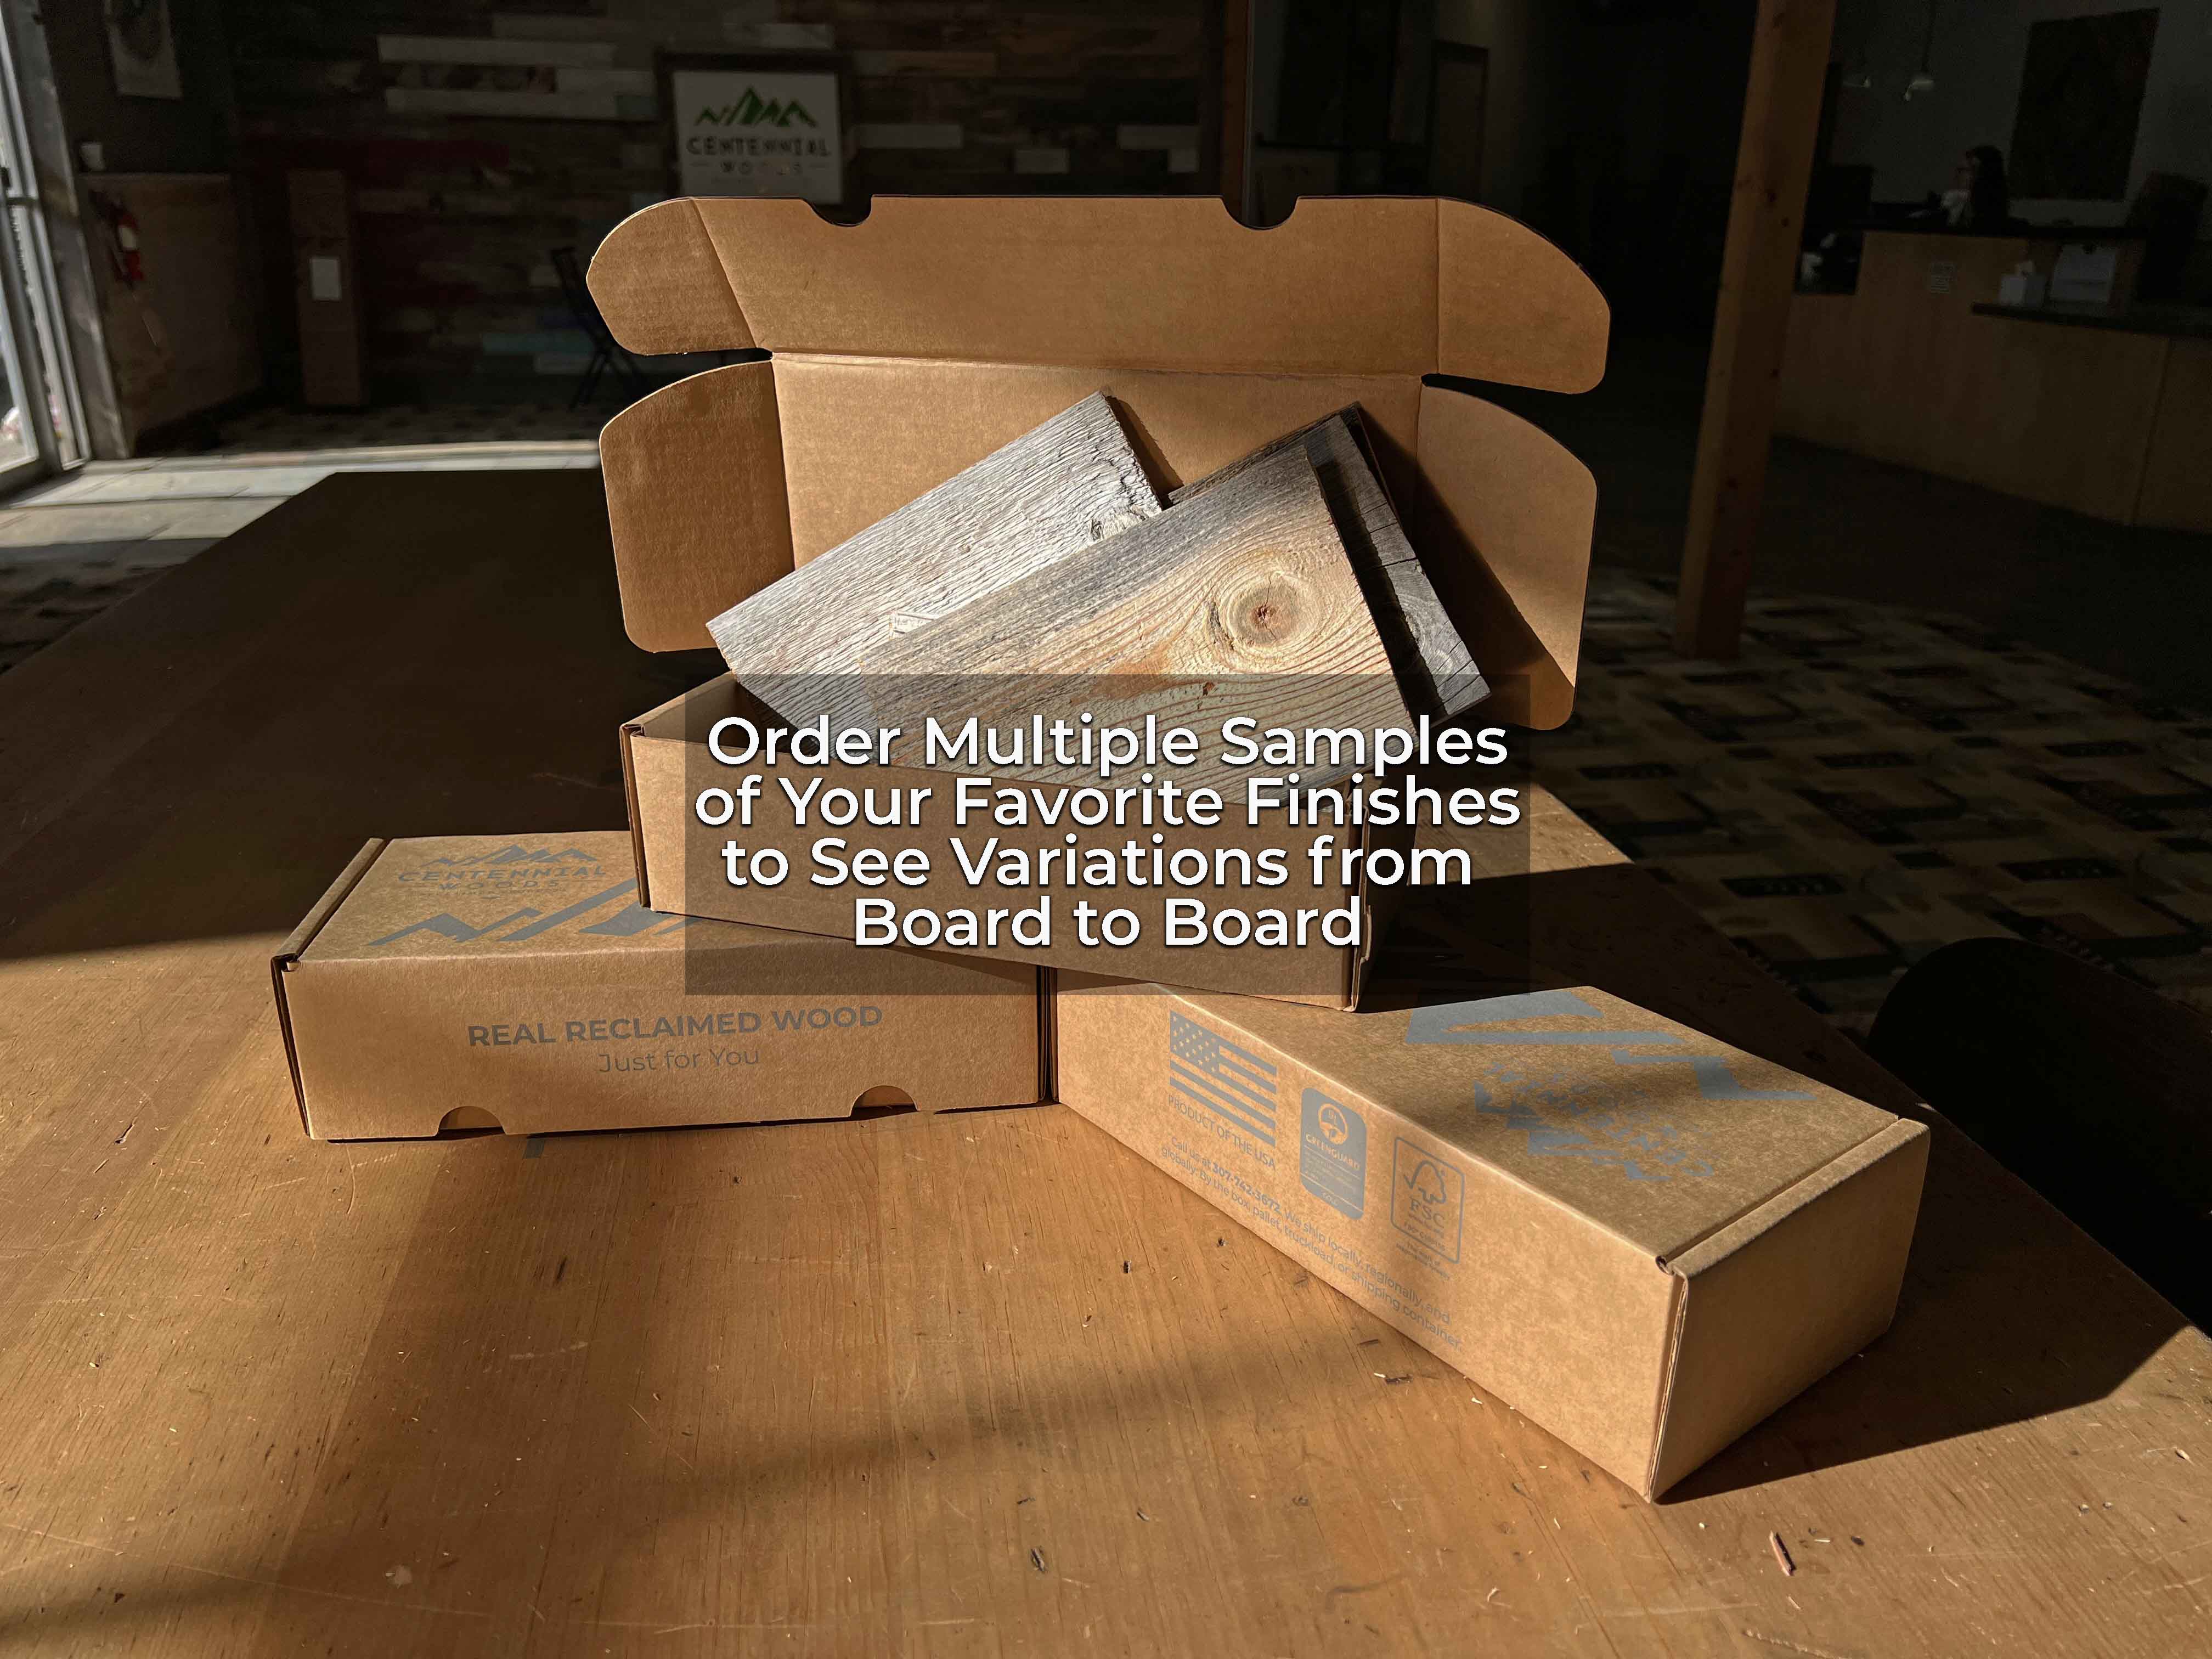 Cardboard sample boxes containing free reclaimed wood samples from Centennial Woods